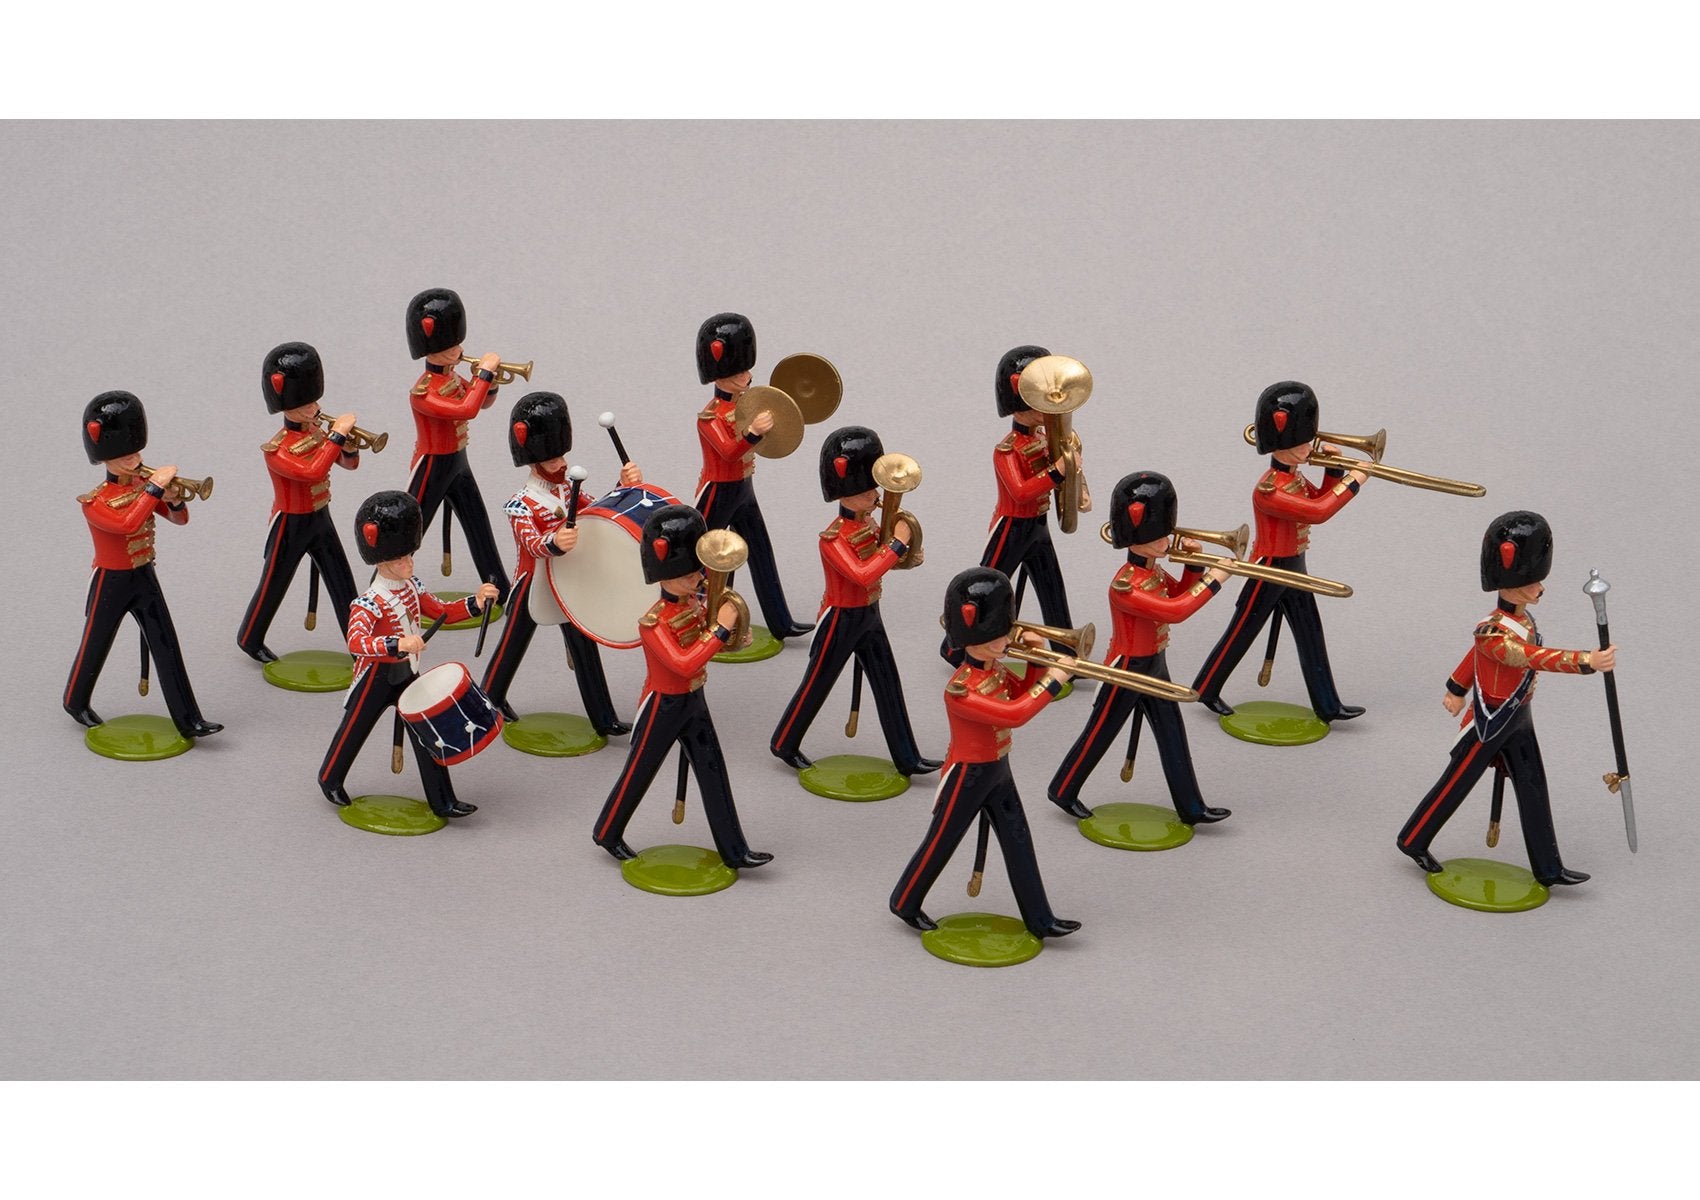 Set 99a Band of the Coldstream Guards 1854 | British Infantry | Crimean War | Combined set 99 and 99a, 13 Coldstream Guards bandsmen | Balaclava, Sevastapol, Alma | © Imperial Productions | Sculpt by David Cowe